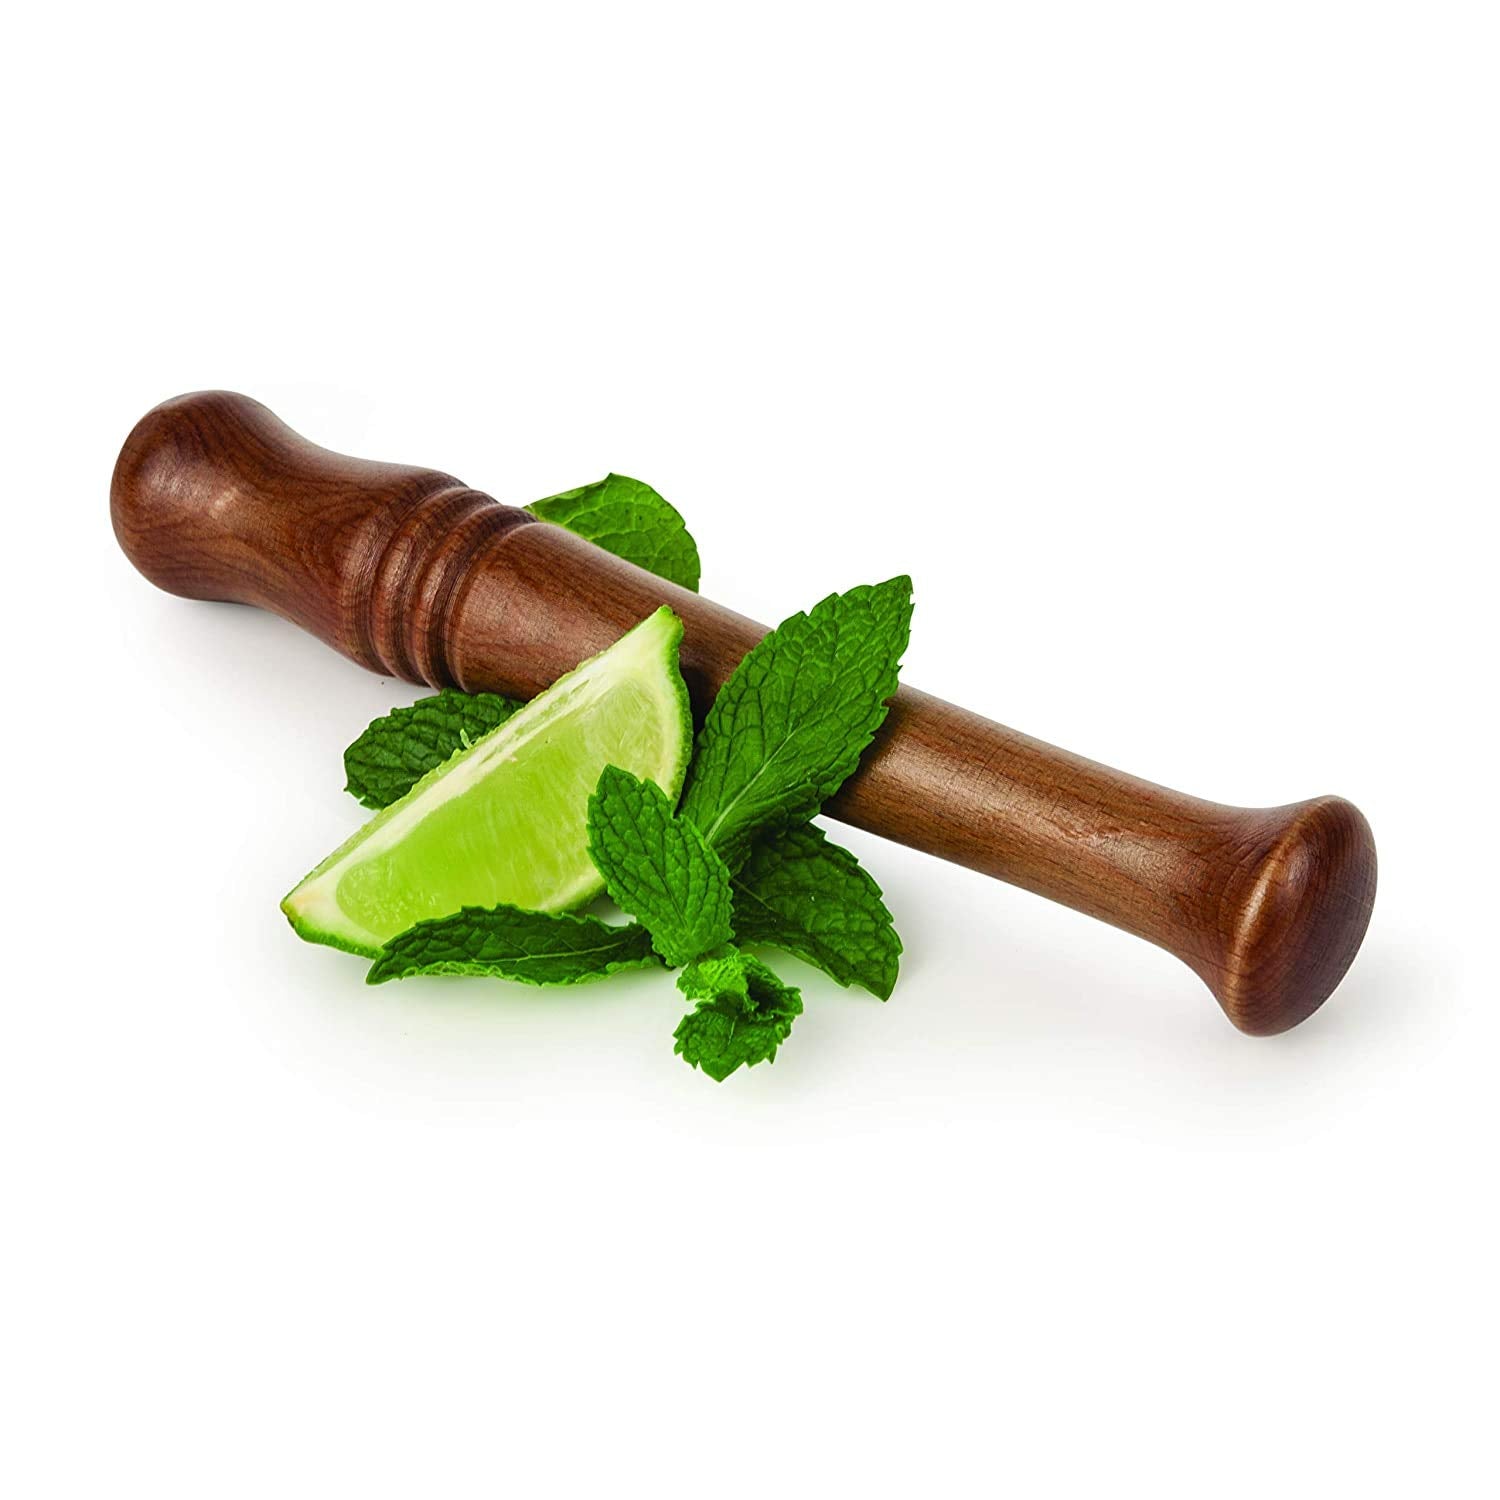 NJ Sheesham Wooden Muddler Bar Tool, 10 - Inch Hardwood Mojito Muddler with Flat Head, Commercial Grade Cocktail Drink Muddlers, Bar Accessories: 1 Pc.